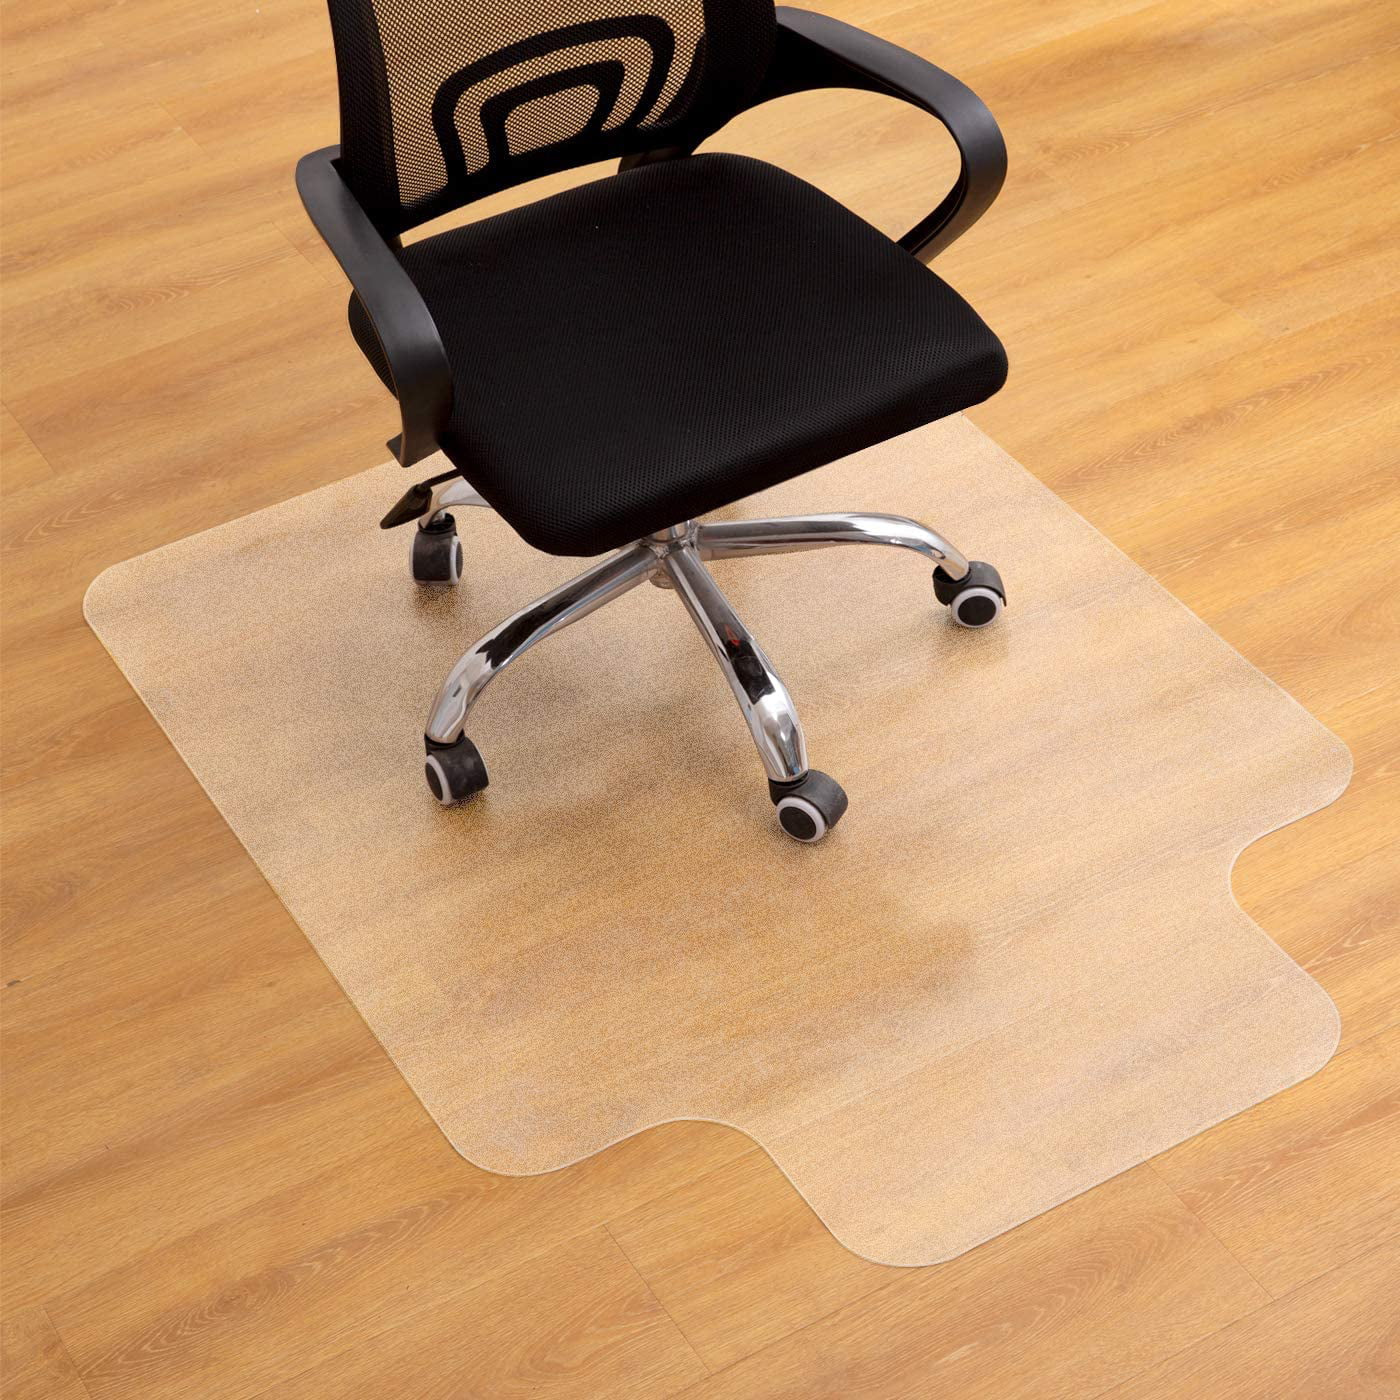 For Hard Floor 36"x48" Transparent Home Office Desk Chair Mat PVC Protector New 